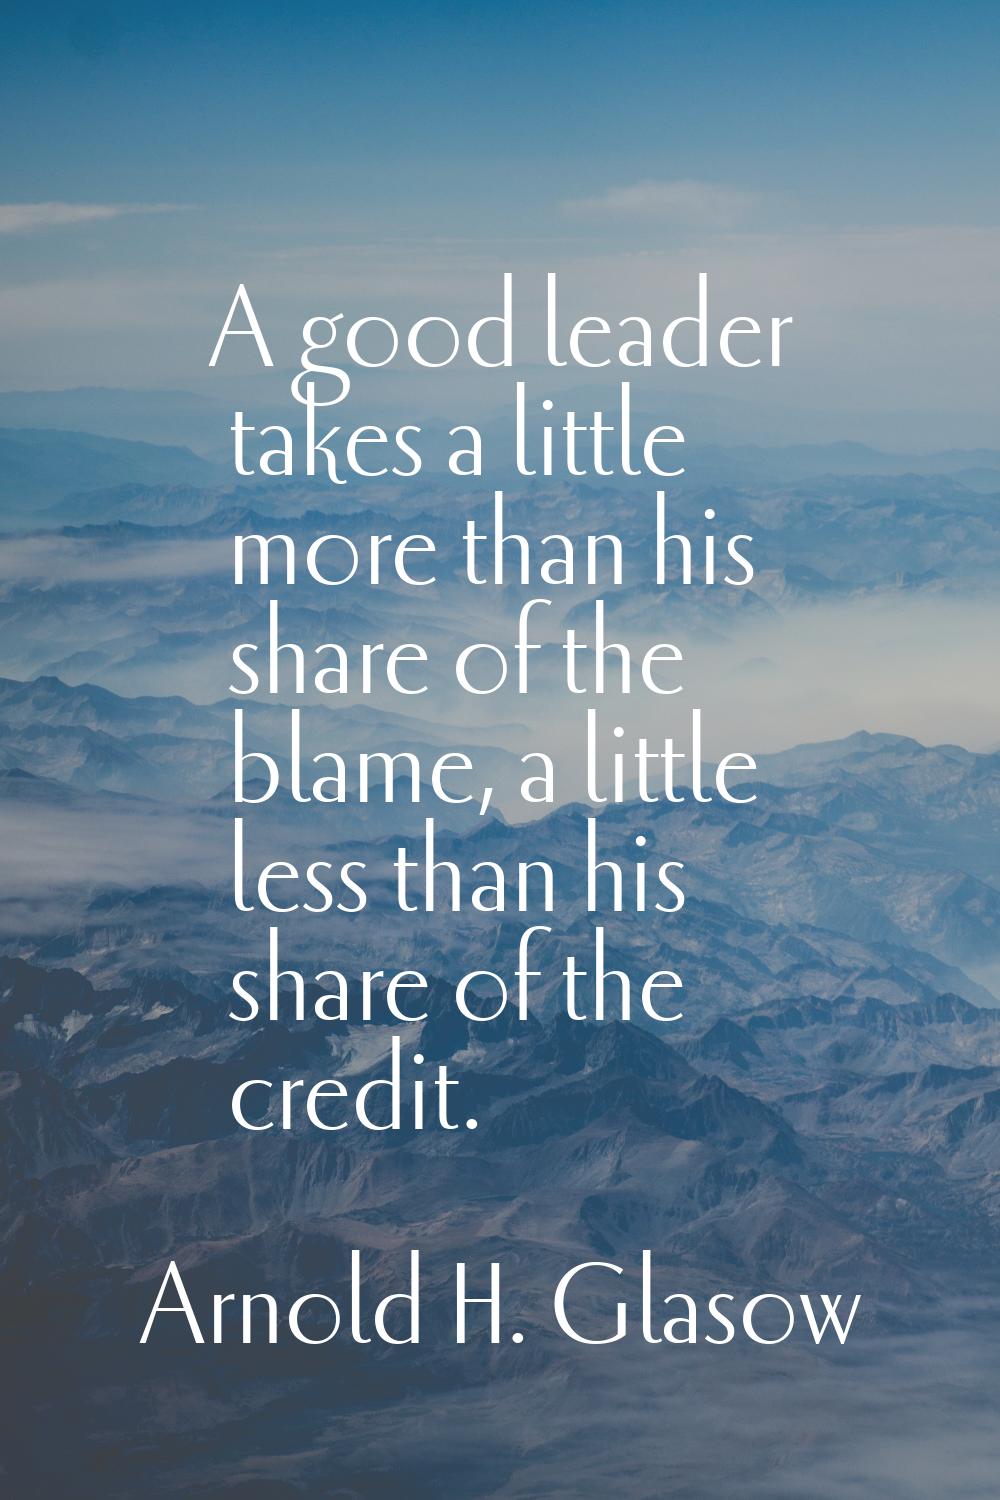 A good leader takes a little more than his share of the blame, a little less than his share of the 